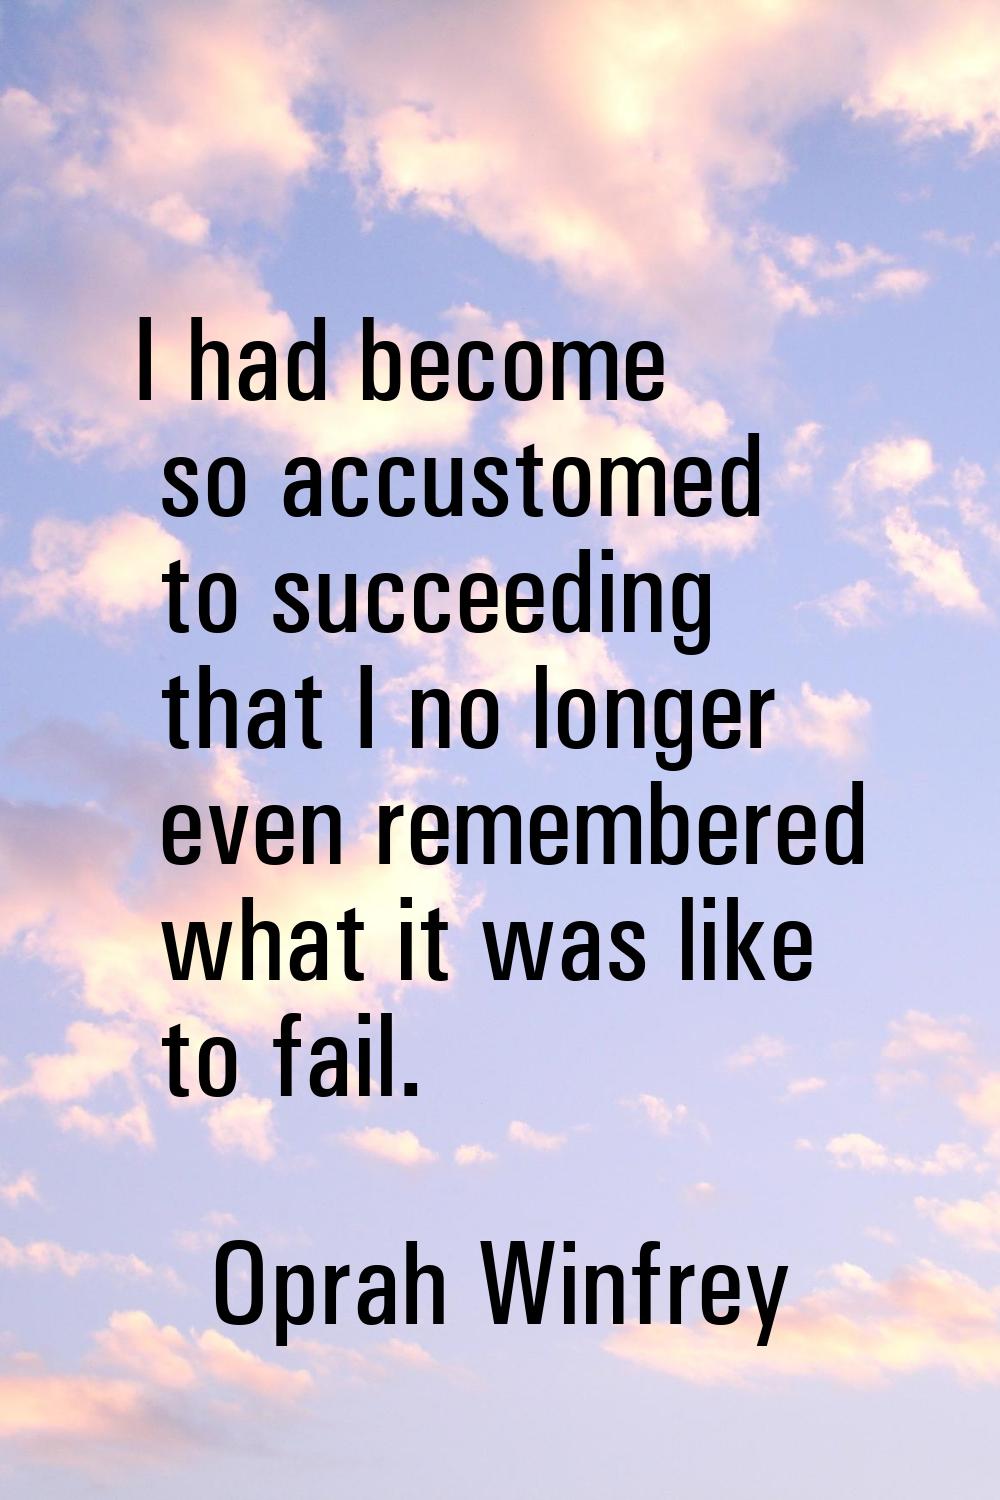 I had become so accustomed to succeeding that I no longer even remembered what it was like to fail.